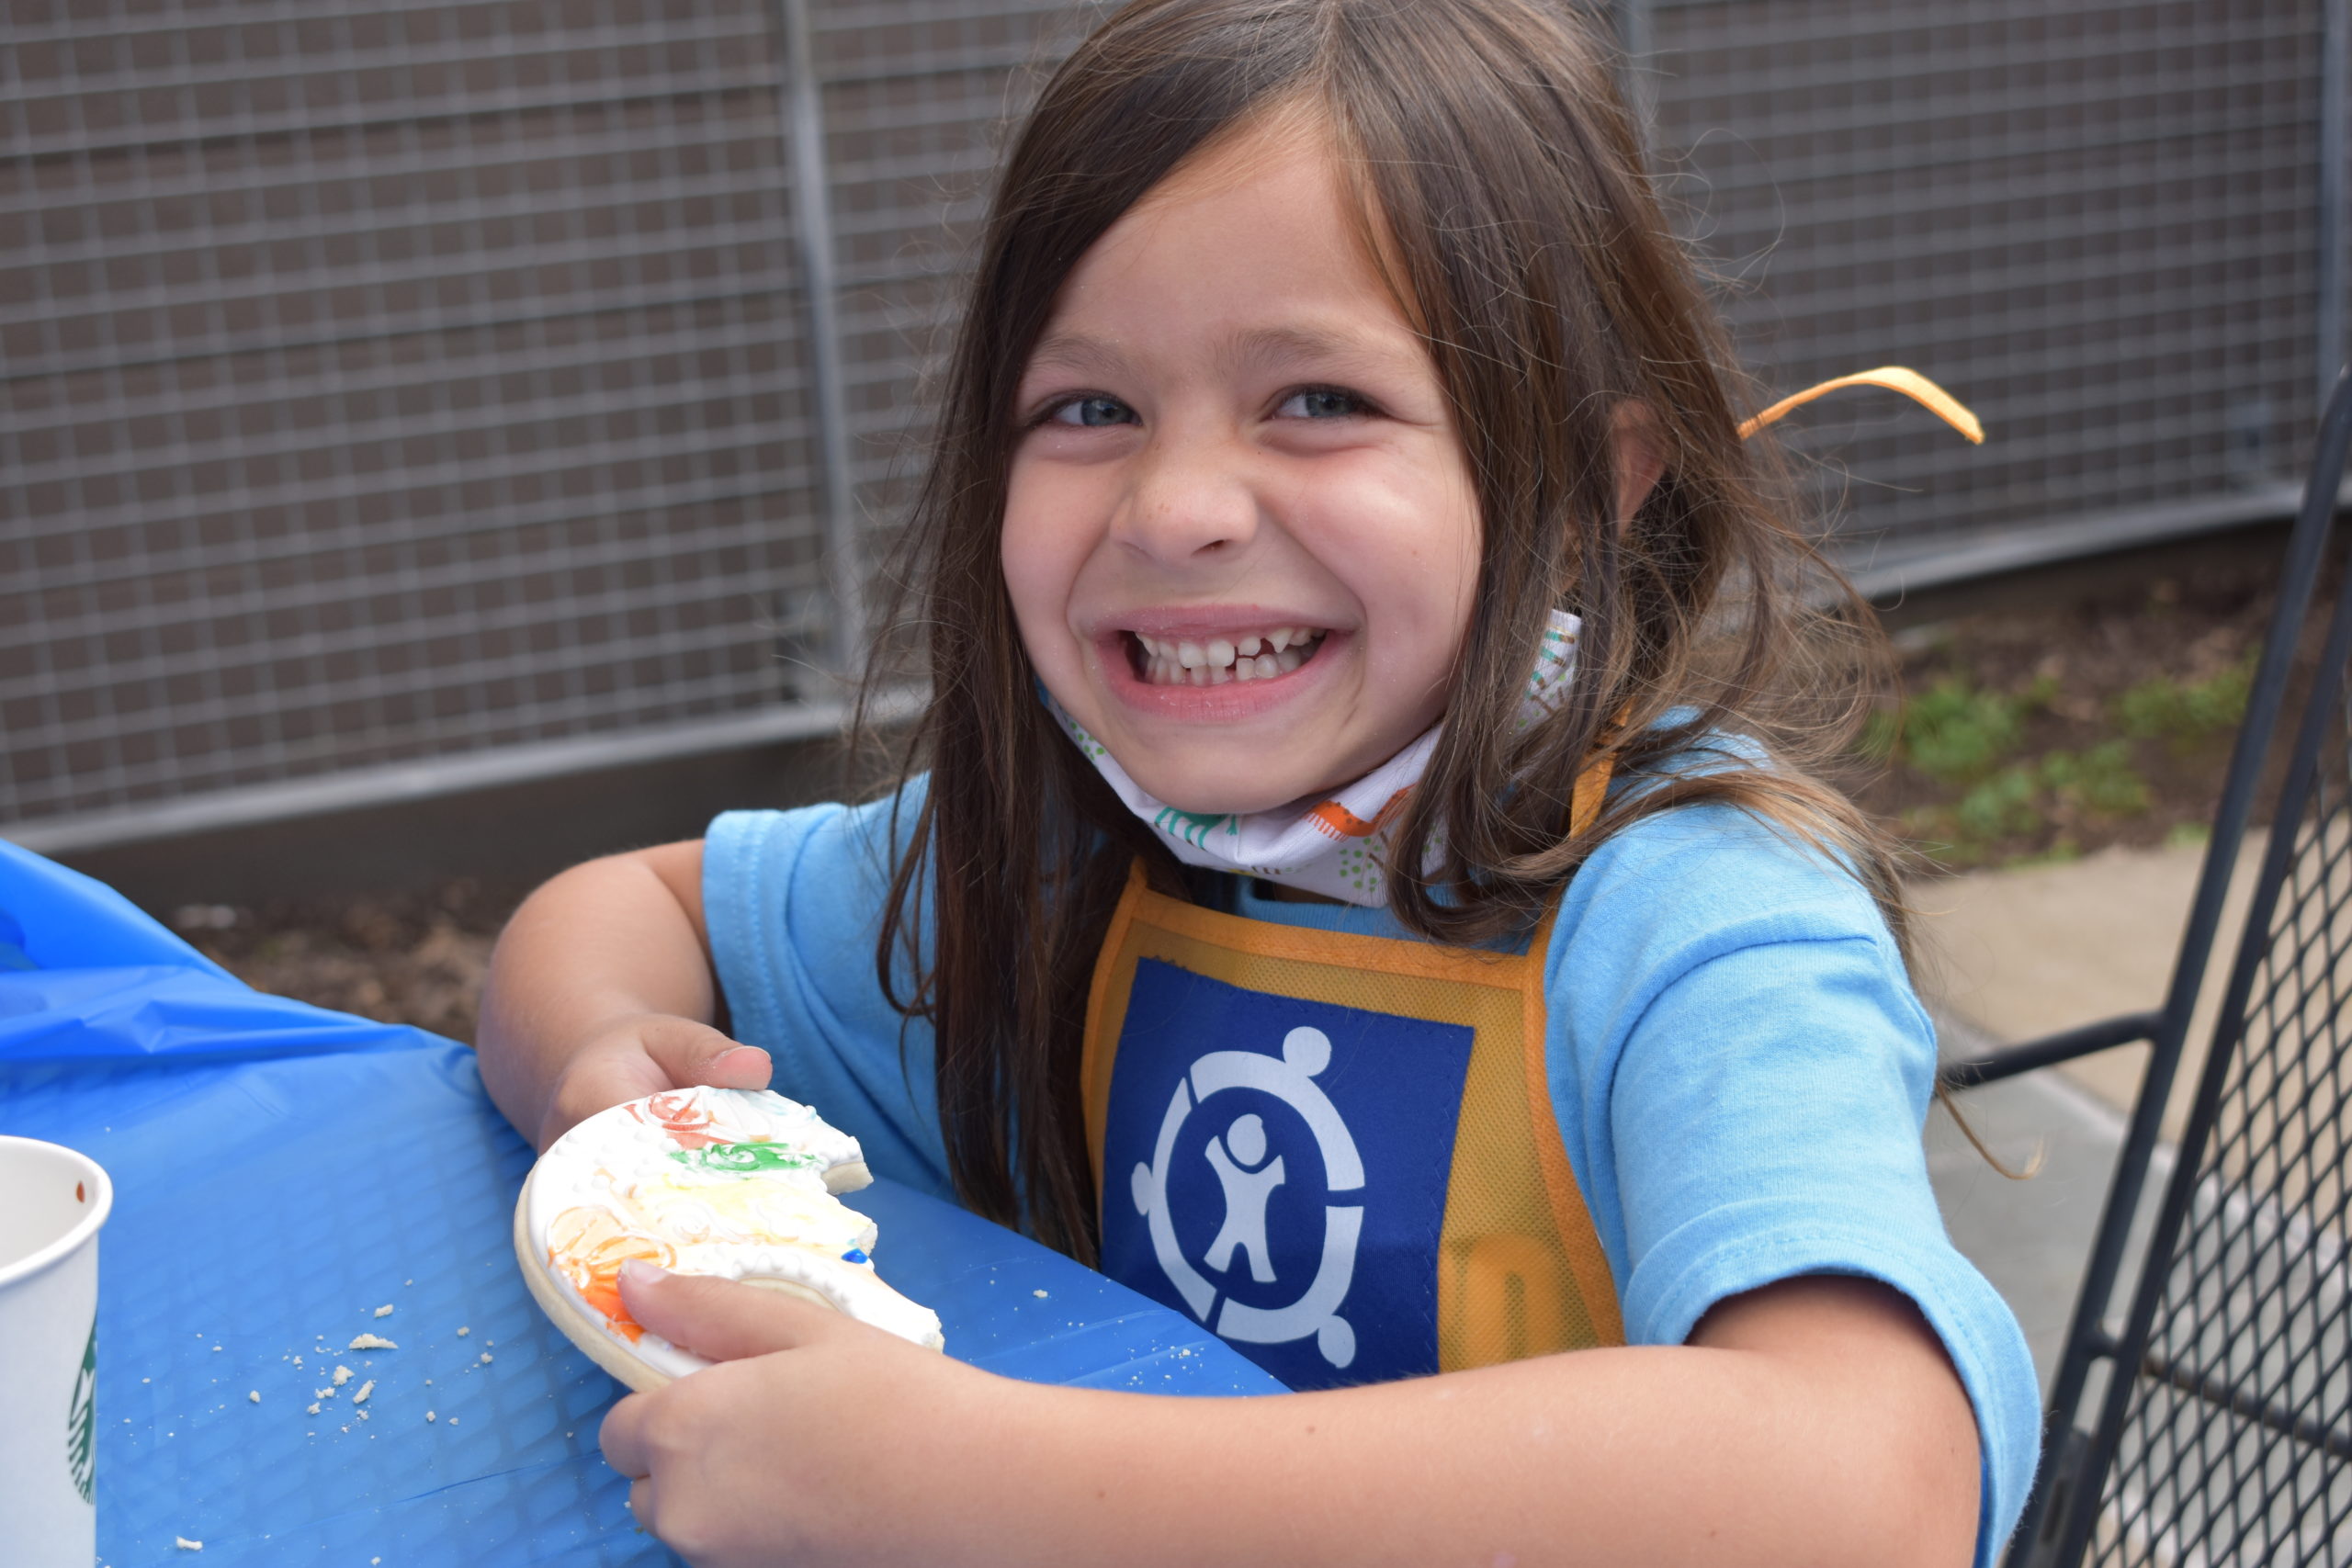 A child smiling and holding a cookie